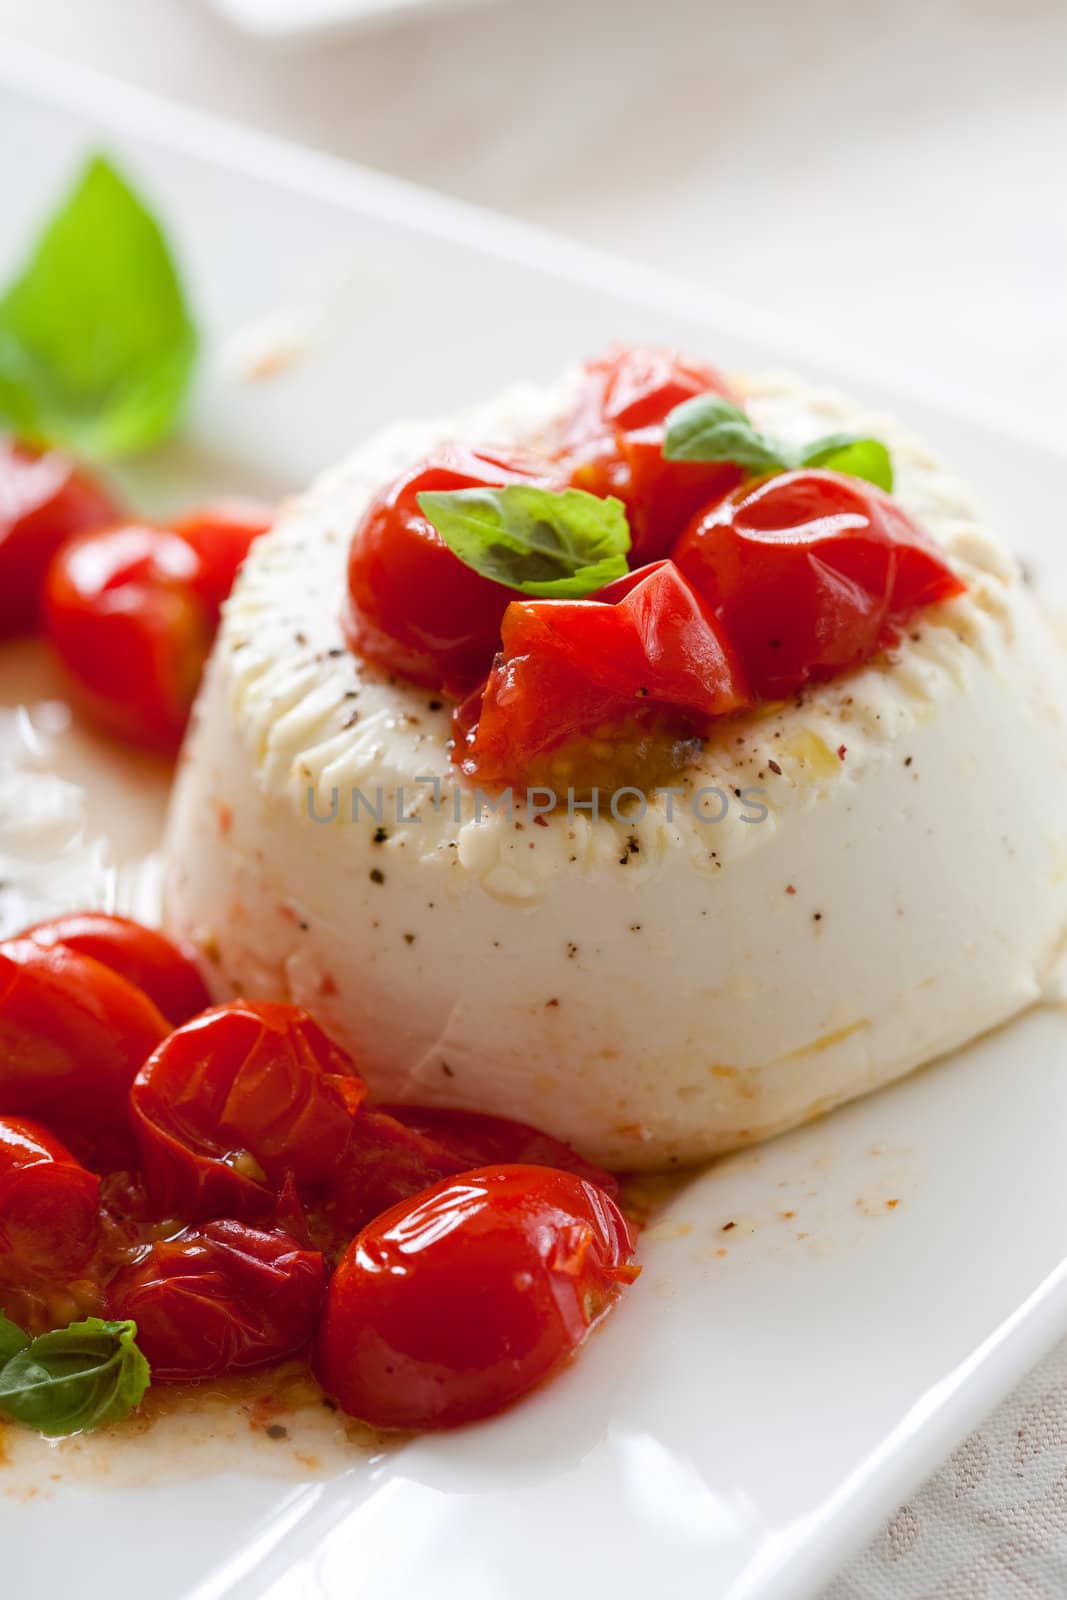 Delicious roasted ricotta with fresh cherry tomatoes and basil